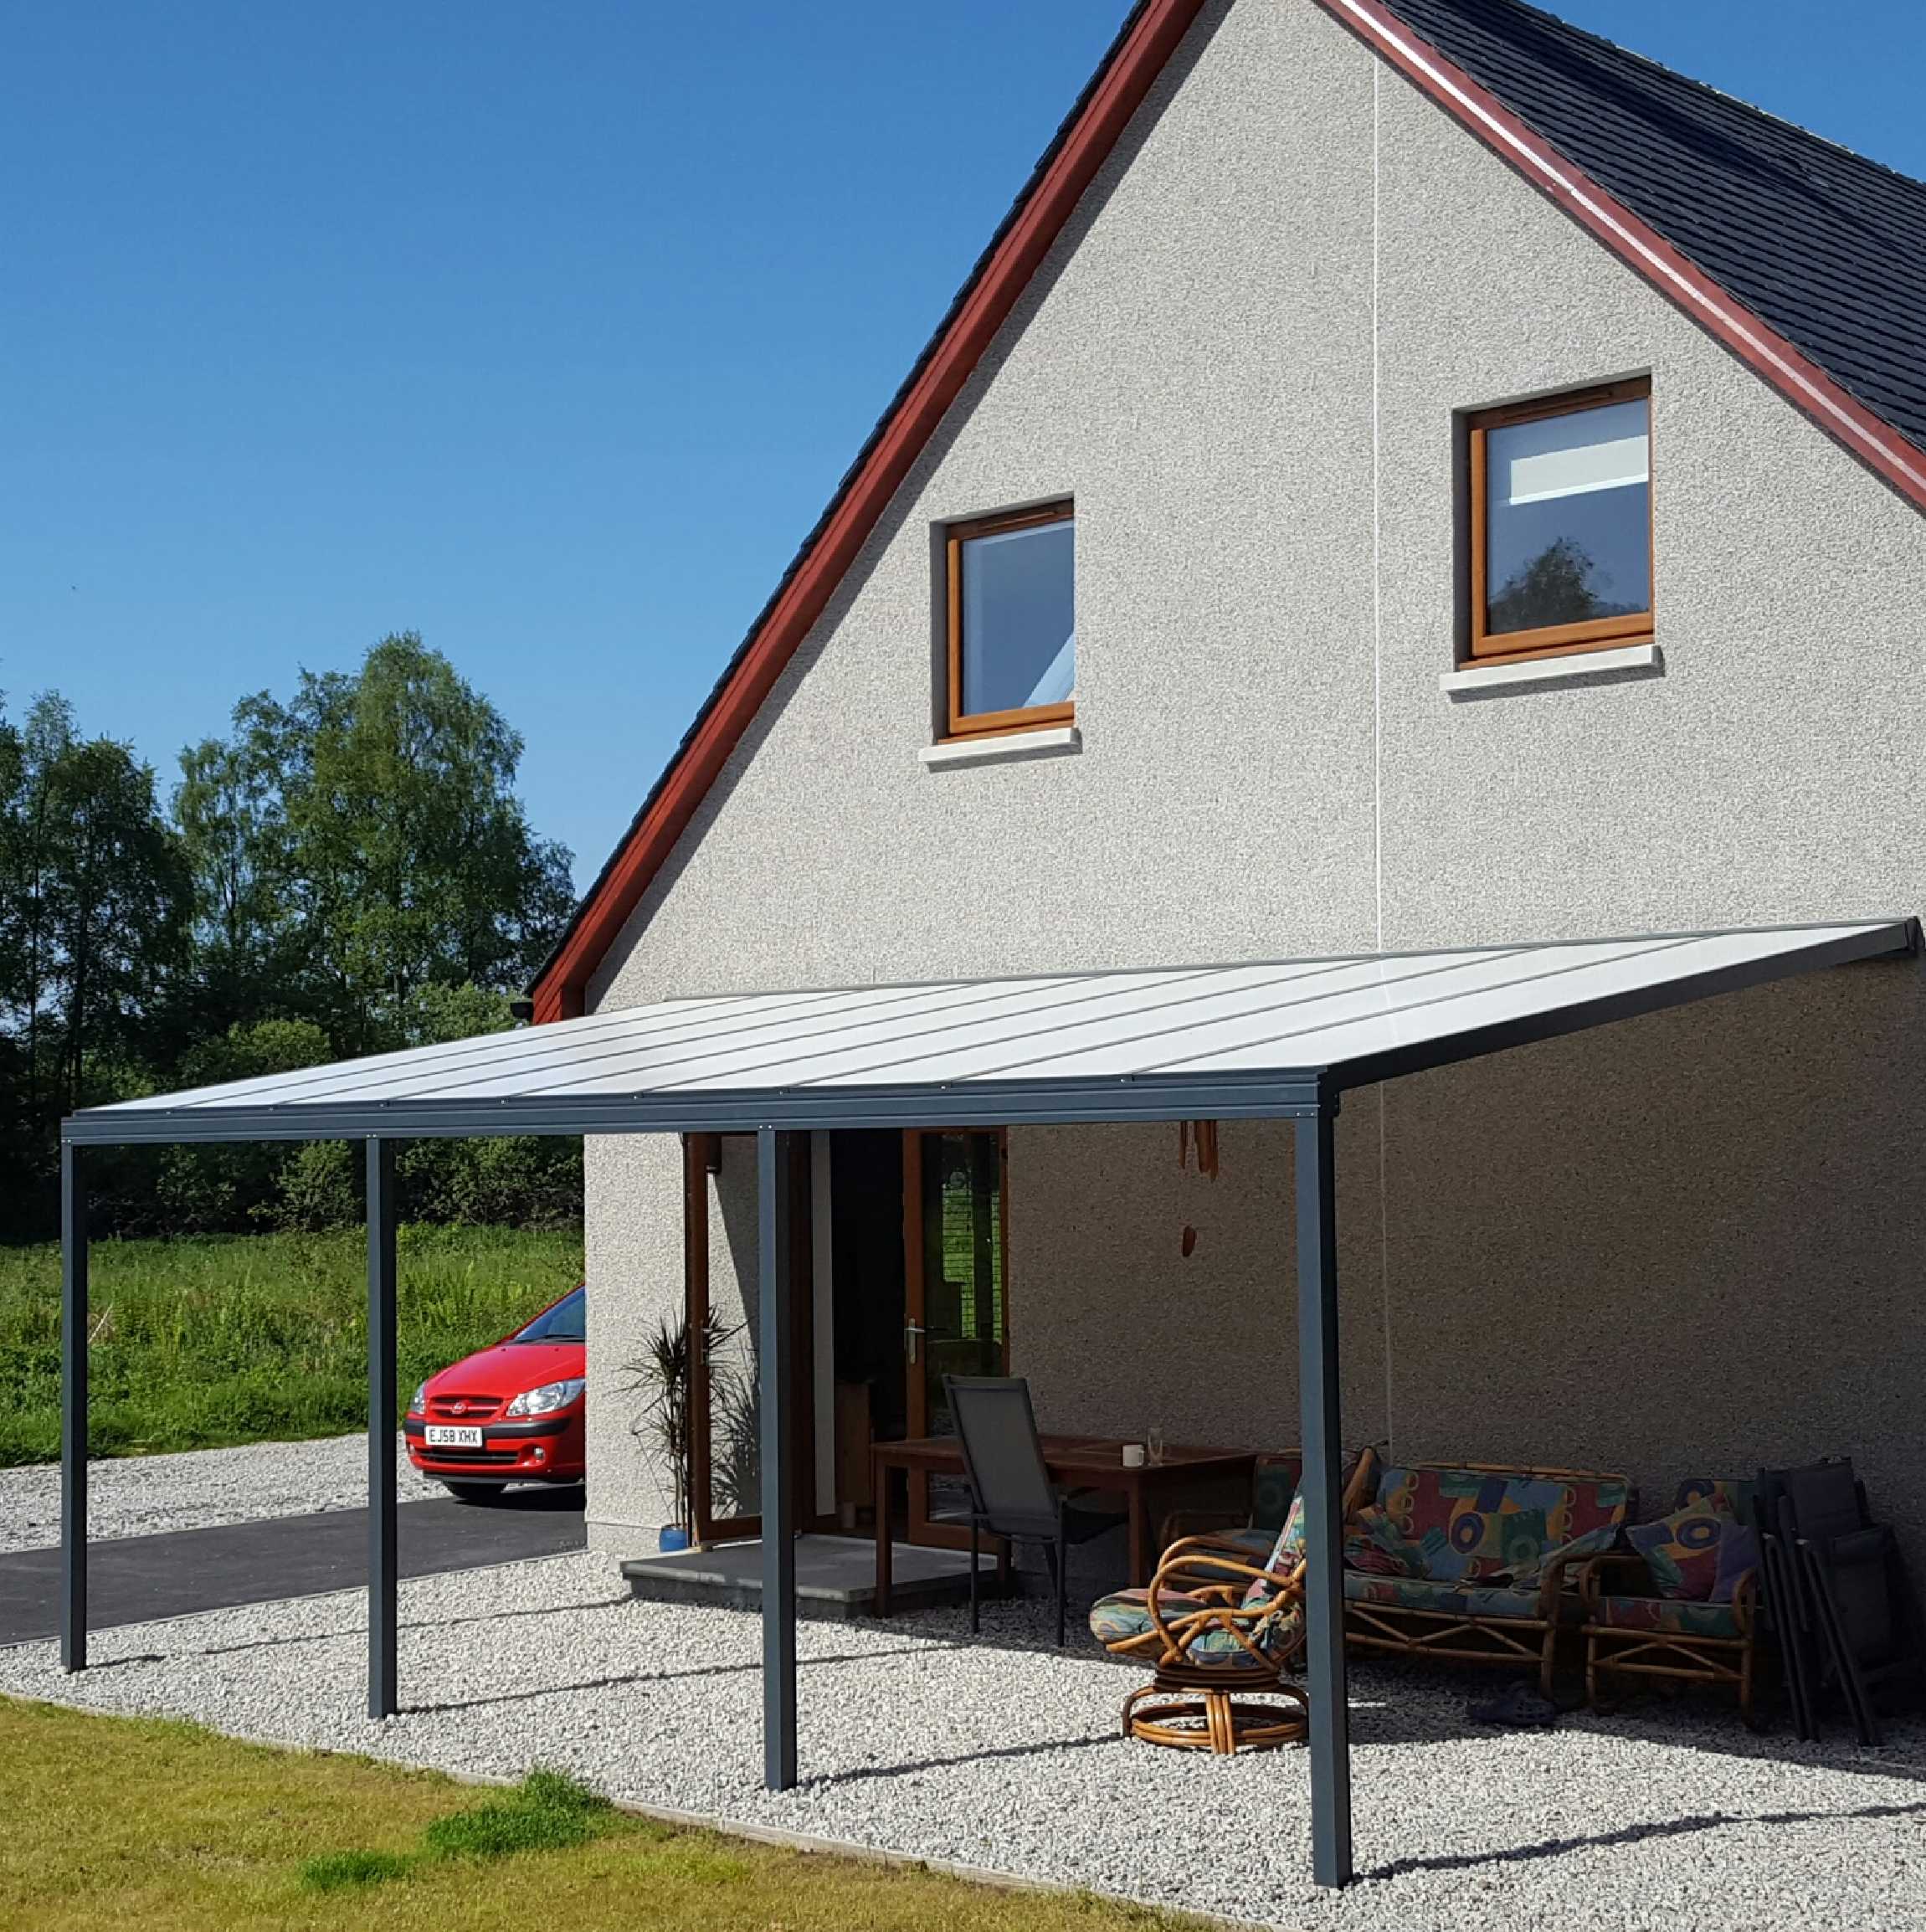 Great selection of Omega Smart Lean-To Canopy, Anthracite Grey, 16mm Polycarbonate Glazing - 11.6m (W) x 1.5m (P), (5) Supporting Posts